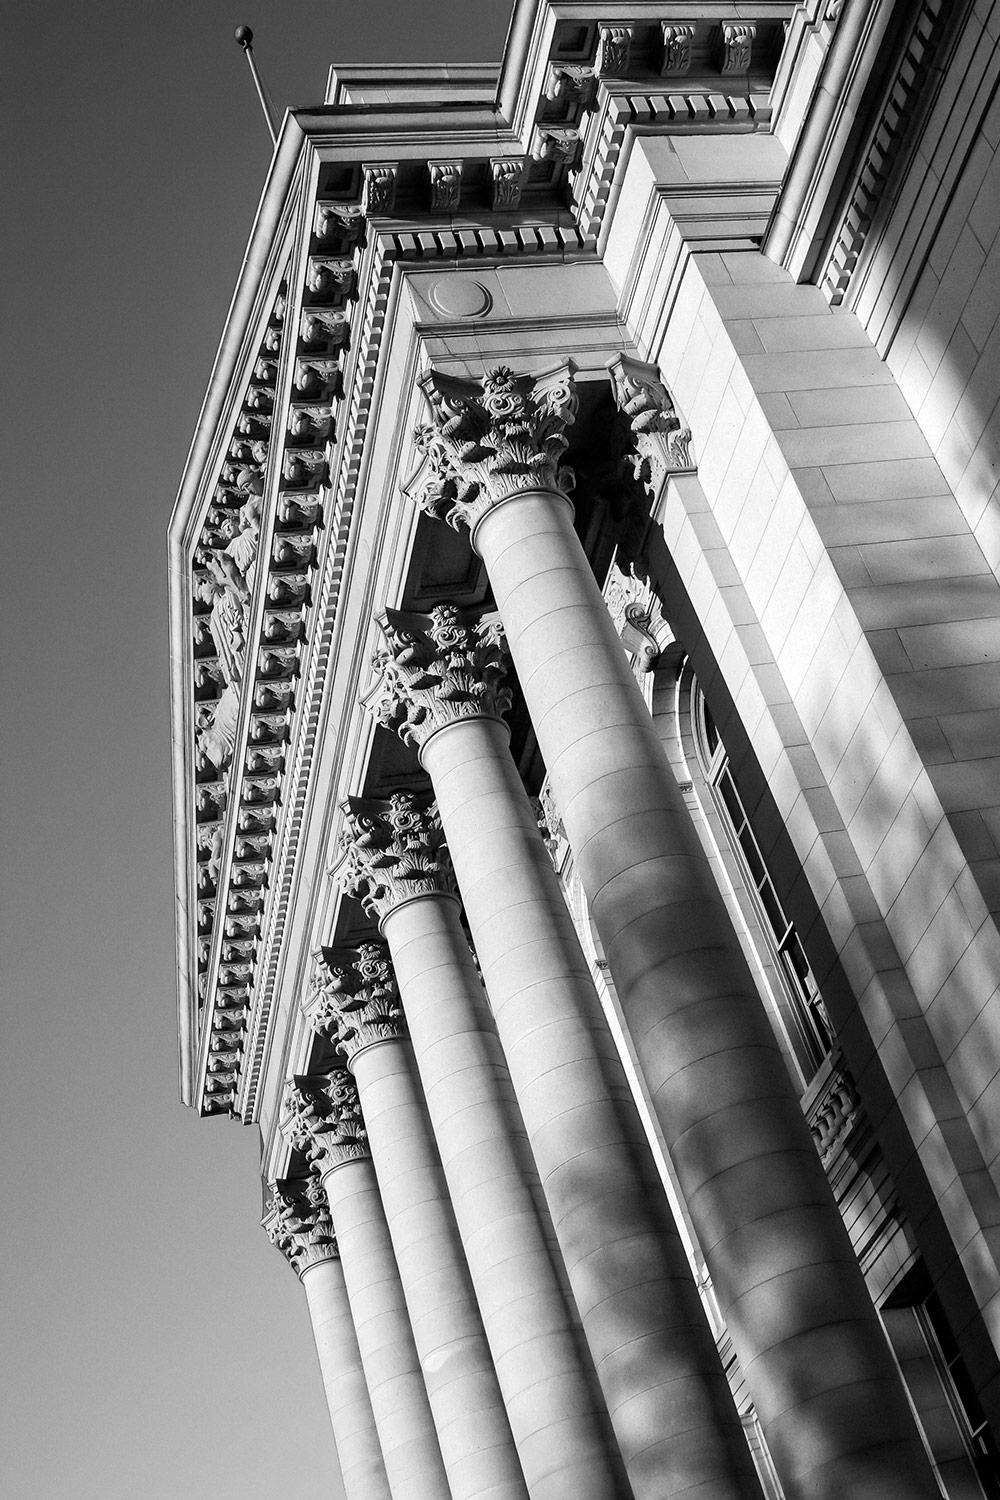 A vertical view of the columns on the Wisconsin State Capitol in Madison, Wisconsin.&nbsp;→ Buy a Print